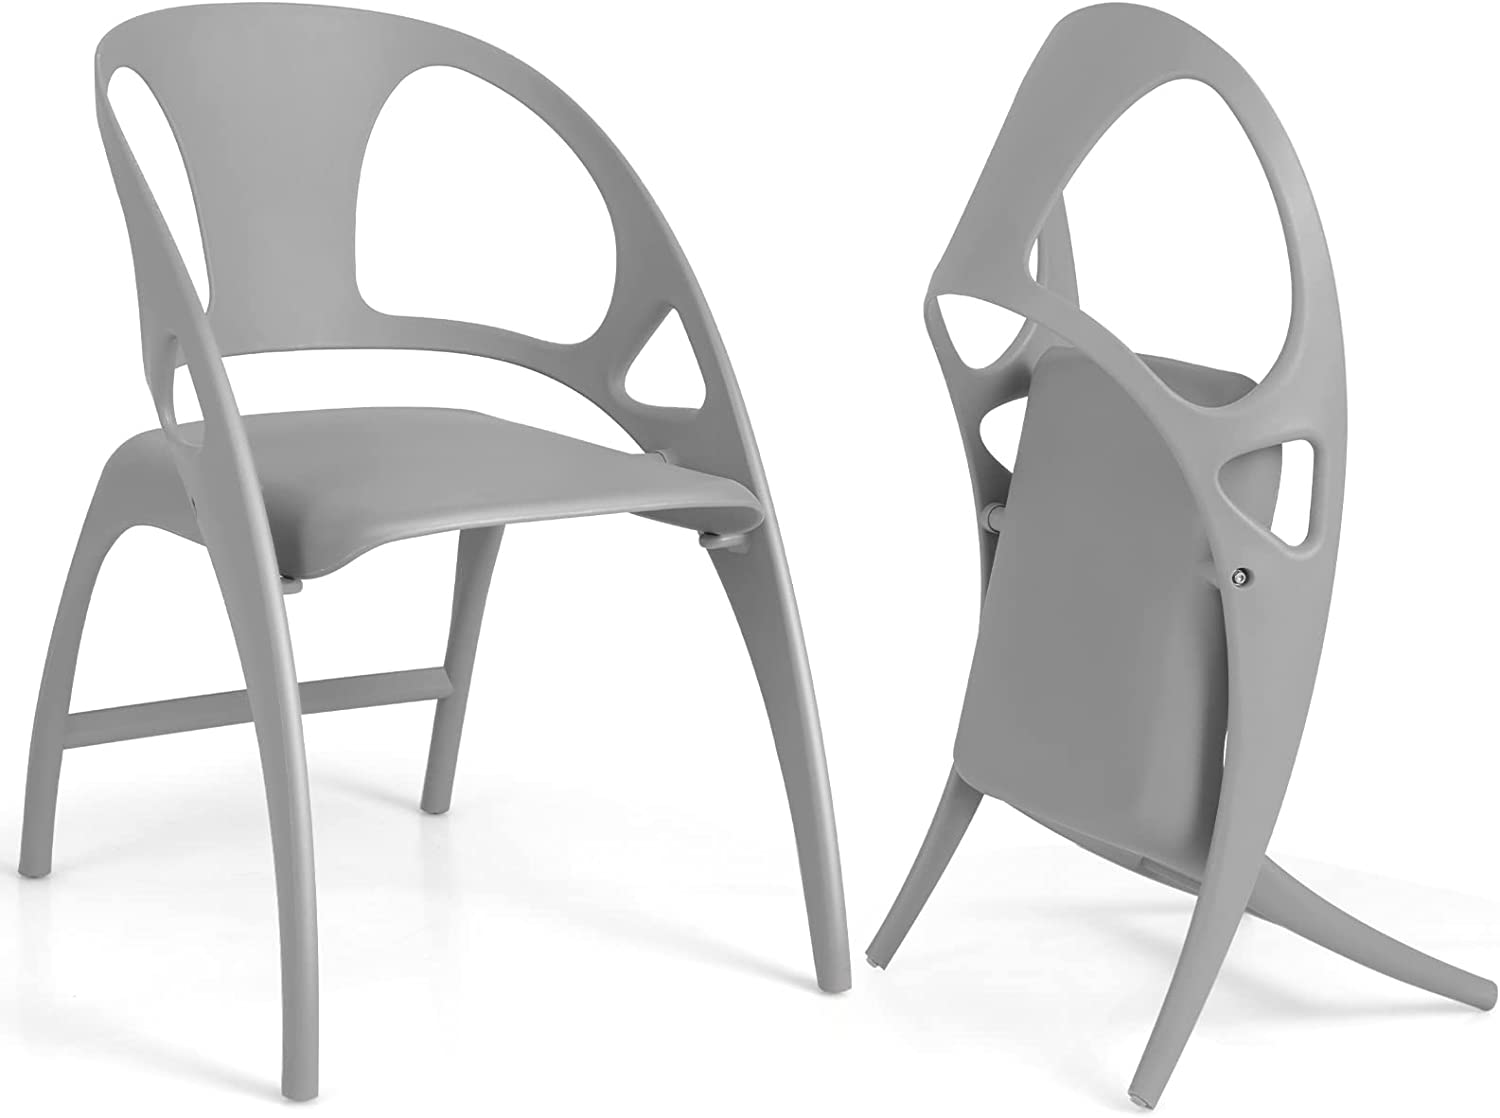 Giantex Folding Dining Chairs Set of 2/4, Outdoor Plastic Dining Chairs with Armrest and High Backrest